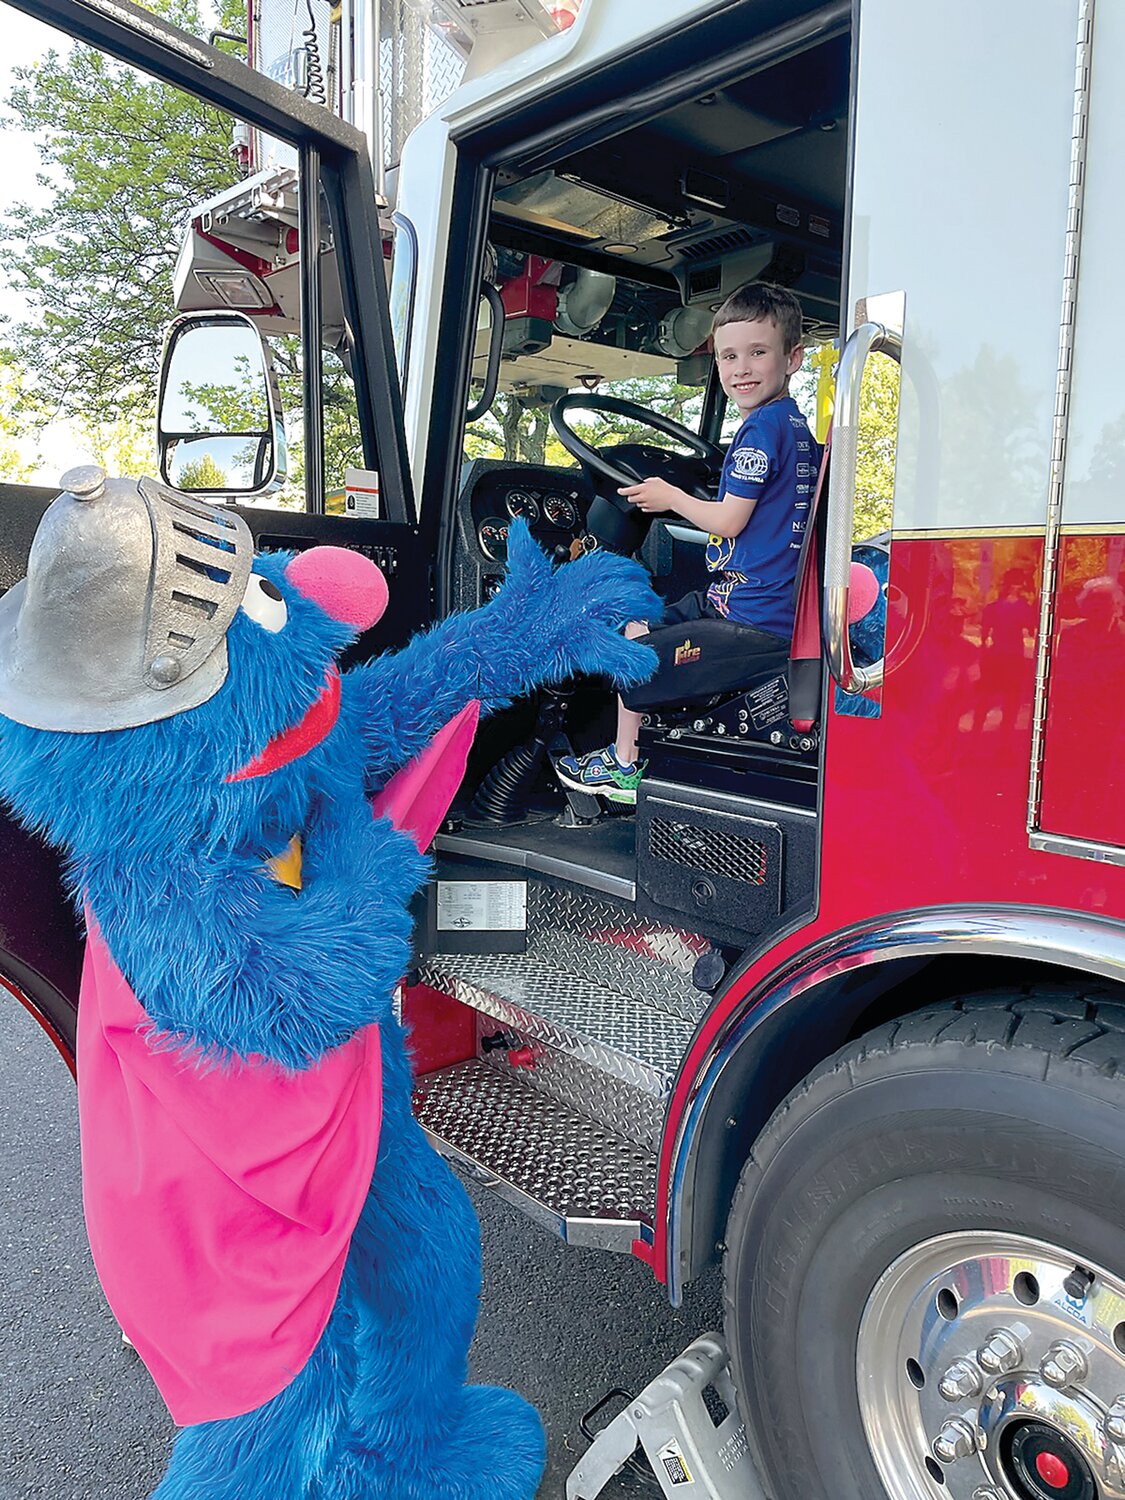 Seven-year-old Jackson Bucantis sits in the driver’s seat of the Langhorne-Middletown Fire Company’s 21 Truck and makes friends with Sesame Place character Grover during a recent visit. Kids participating in the Kiwanis-Herald Sesame Place Classic races on May 19 will get a chance to do the same.